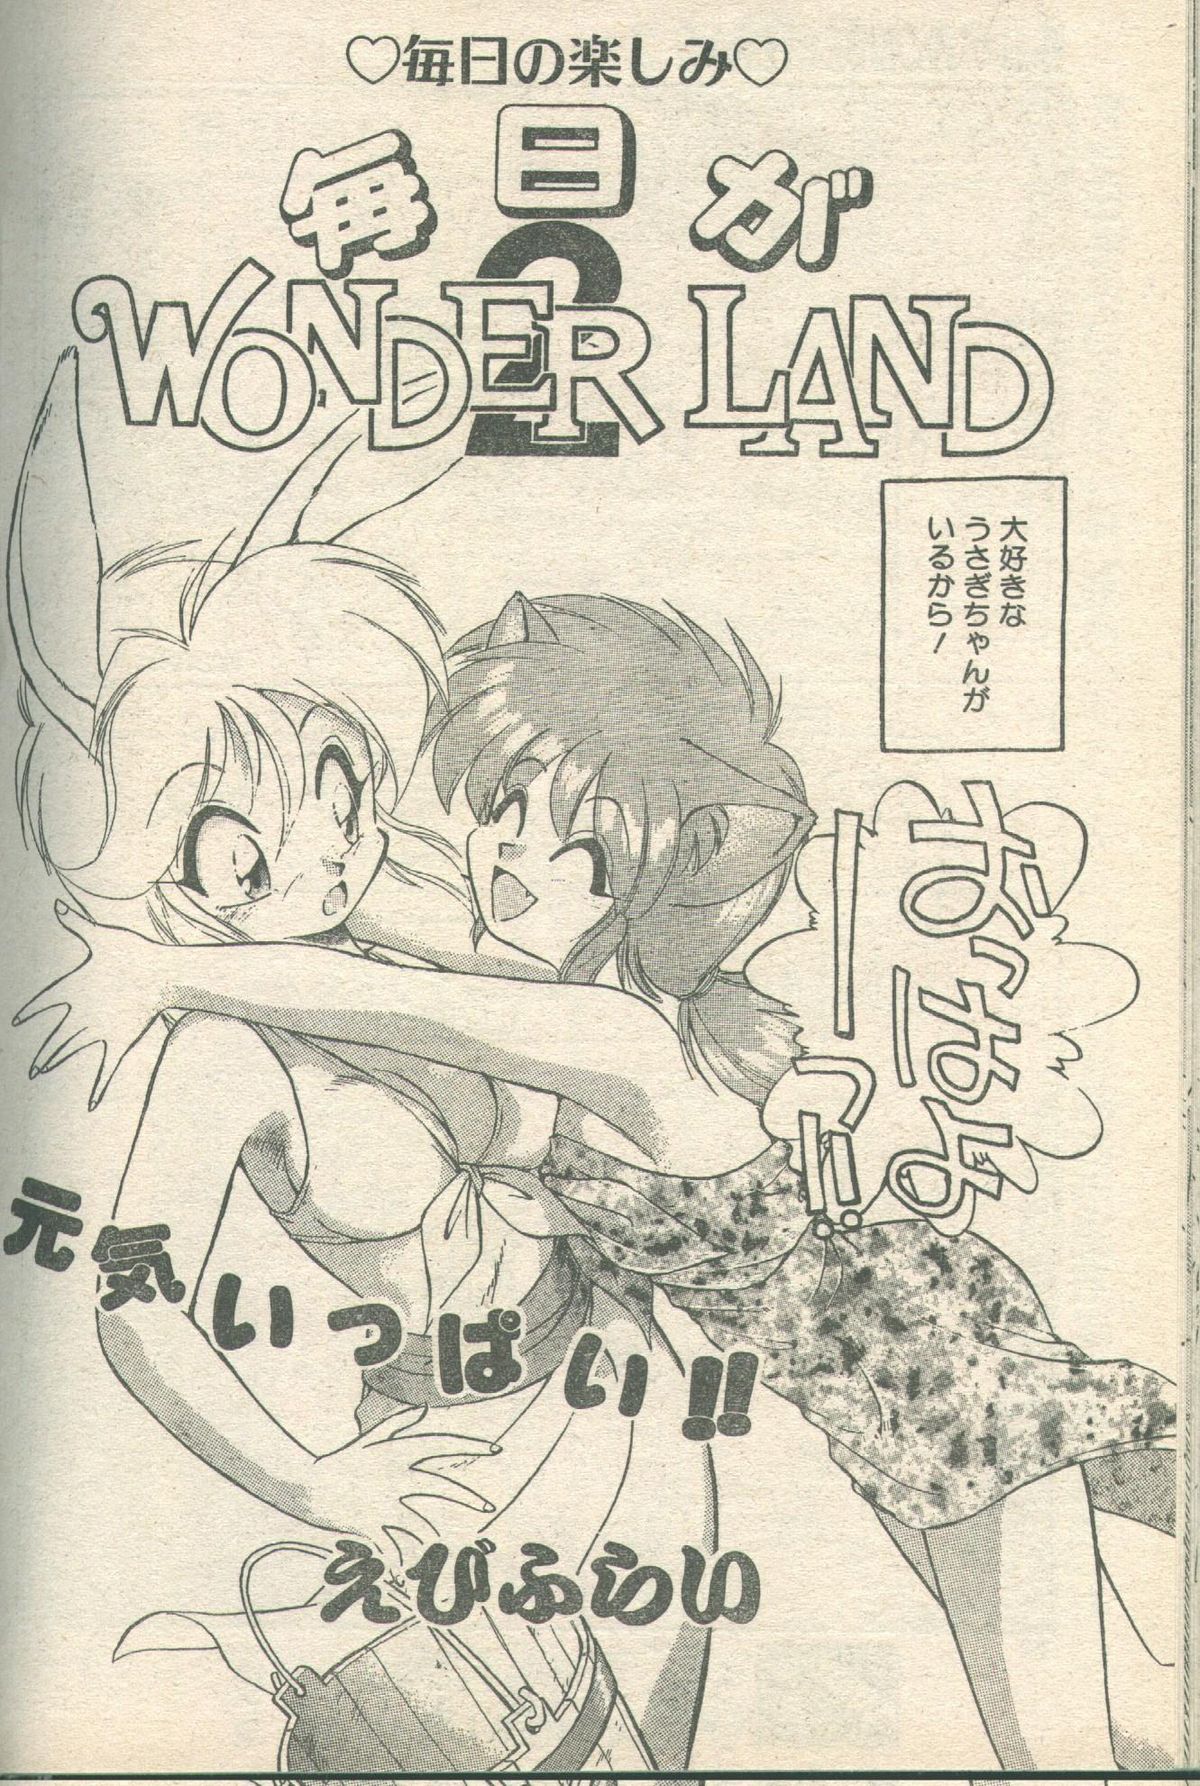 Candy Time 1993-05 [Incomplete] キャンディータイム 1993年05月号 [不完全]